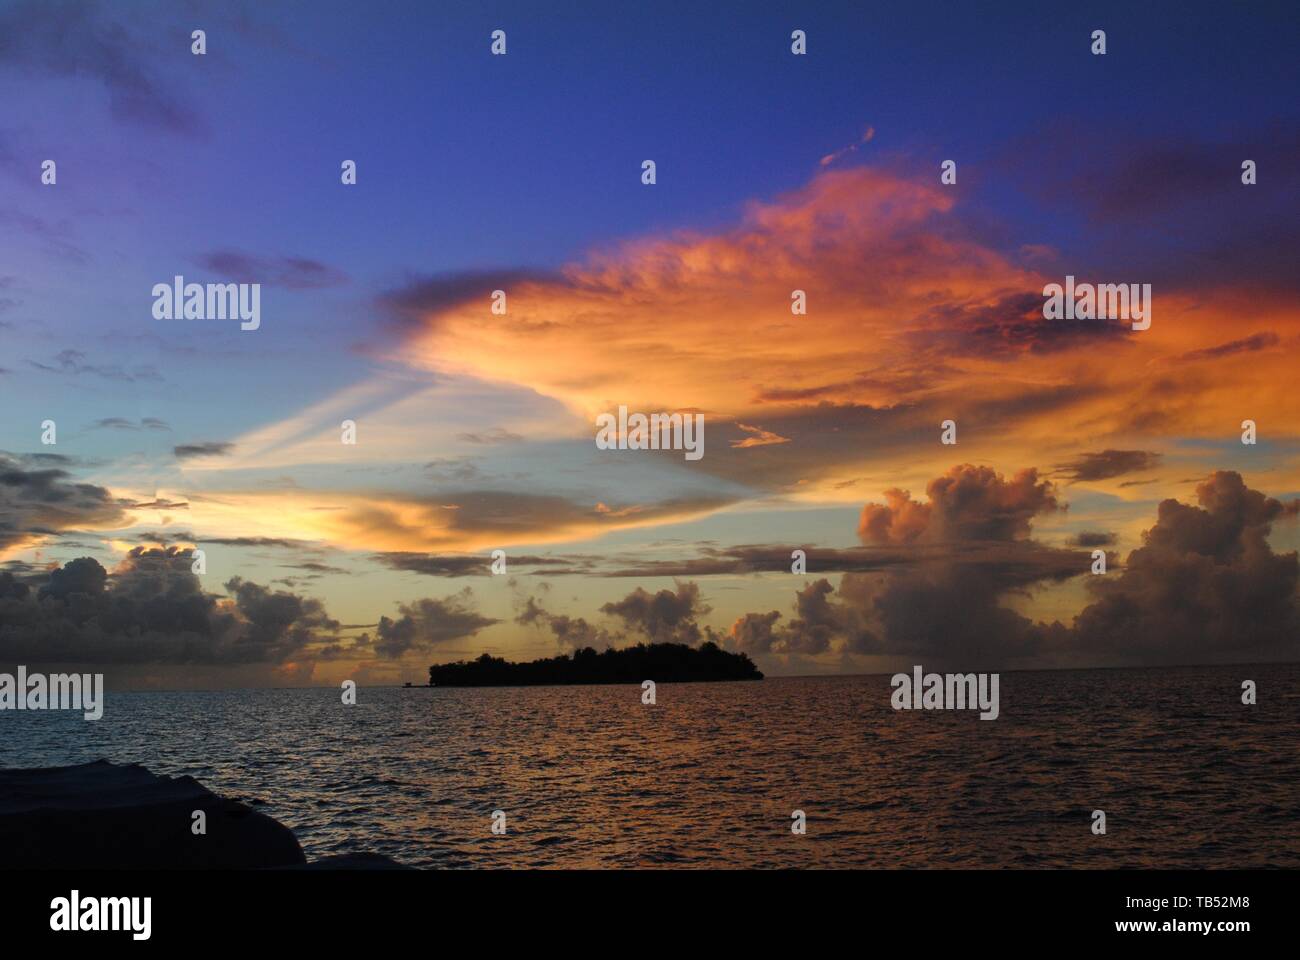 Beautiful clouds at sunset reflected in the waters of the Saipan lagoon, with the Managaha Island in the distance. Stock Photo